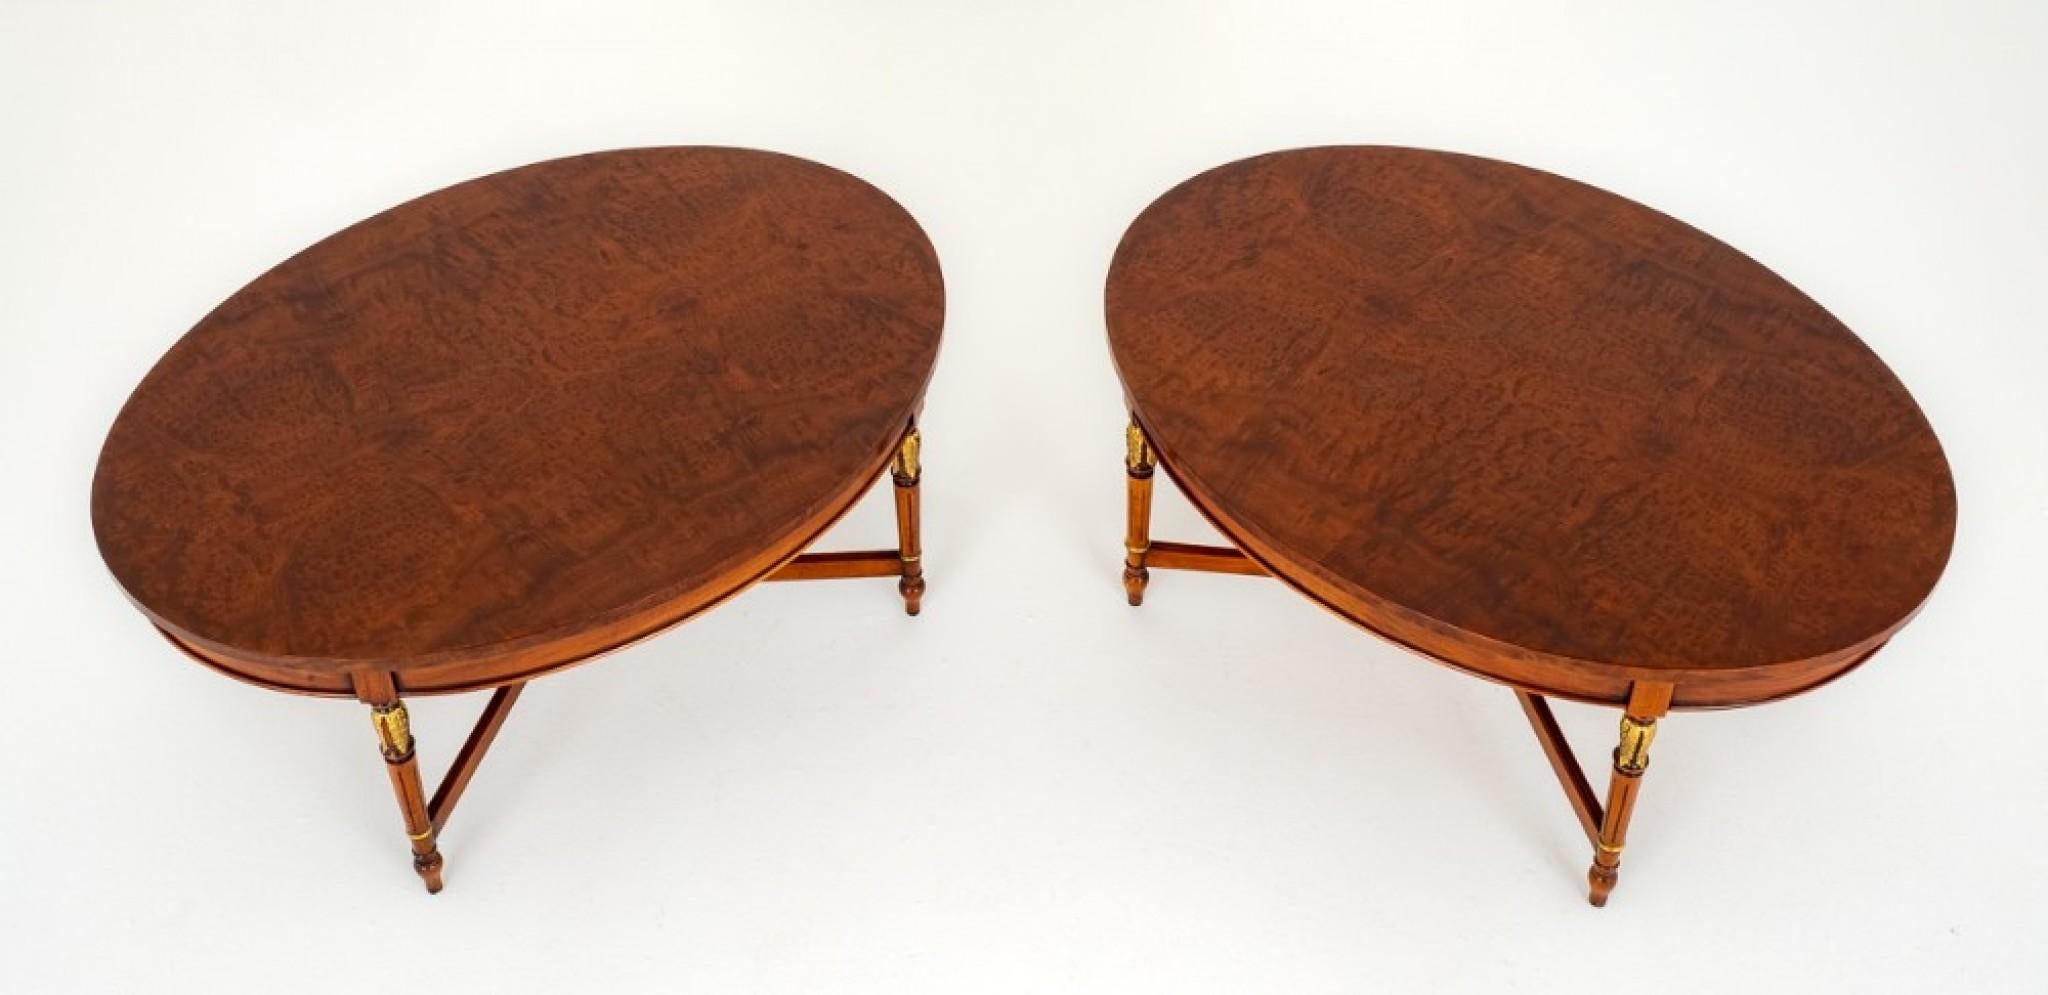 Early 20th Century Pair Regency Coffee Tables Walnut Interiors For Sale